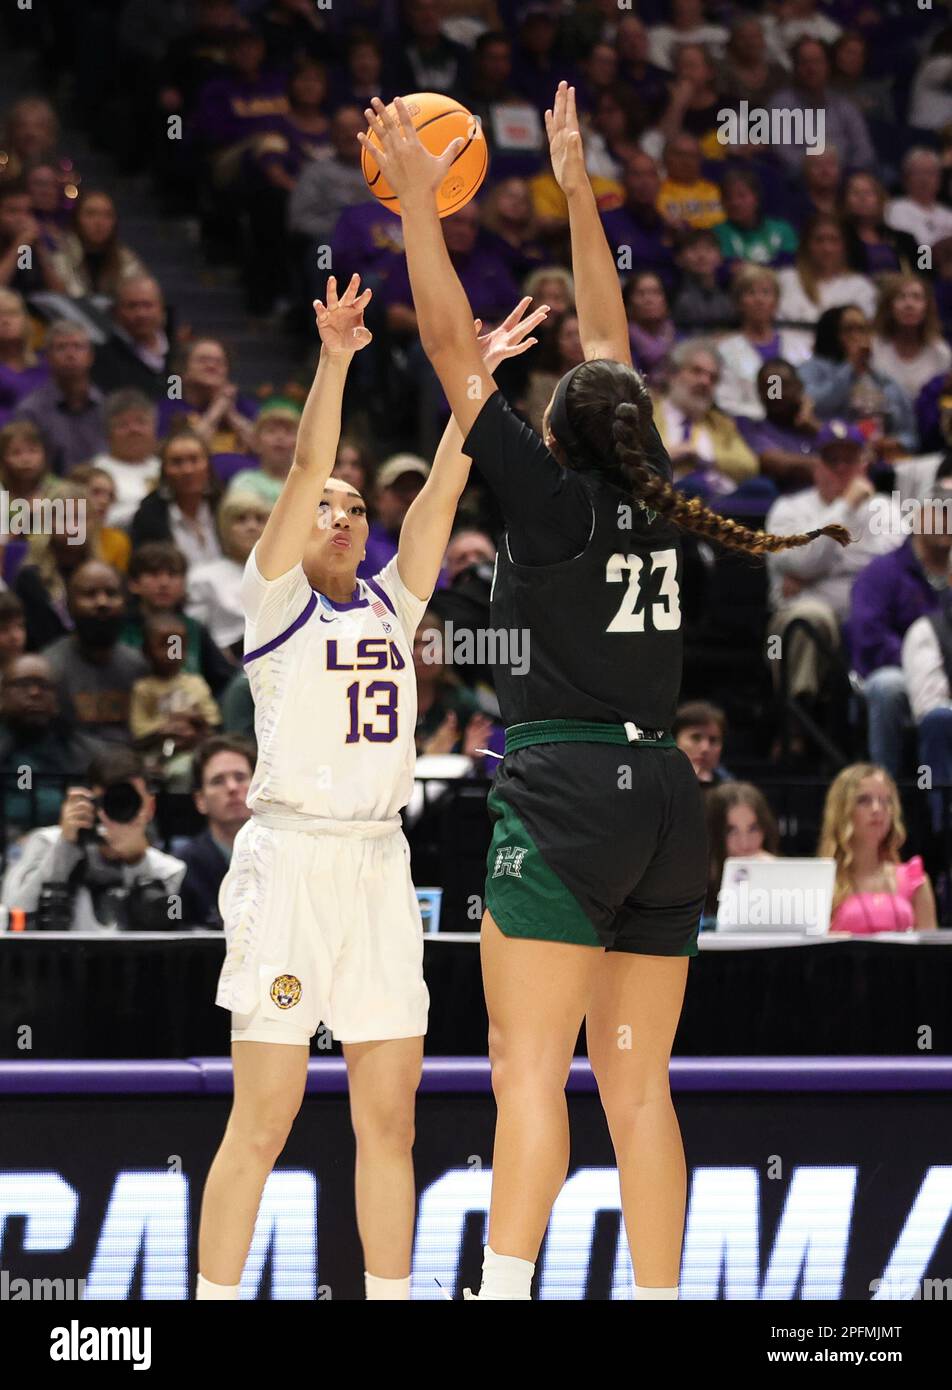 Baton Rouge, USA. 17th Mar, 2023. LSU Tigers guard Last-Tear Poa (13) shoots a three-pointer over Hawai'i Rainbow Wahine guard Meilani McBee (23) during the first round of the Women's Basketball NCAA Tournament at the Pete Maravich Assembly Center in Baton Rouge, Louisiana on Friday, March 17, 2023. (Photo by Peter G. Forest/Sipa USA) Credit: Sipa USA/Alamy Live News Stock Photo